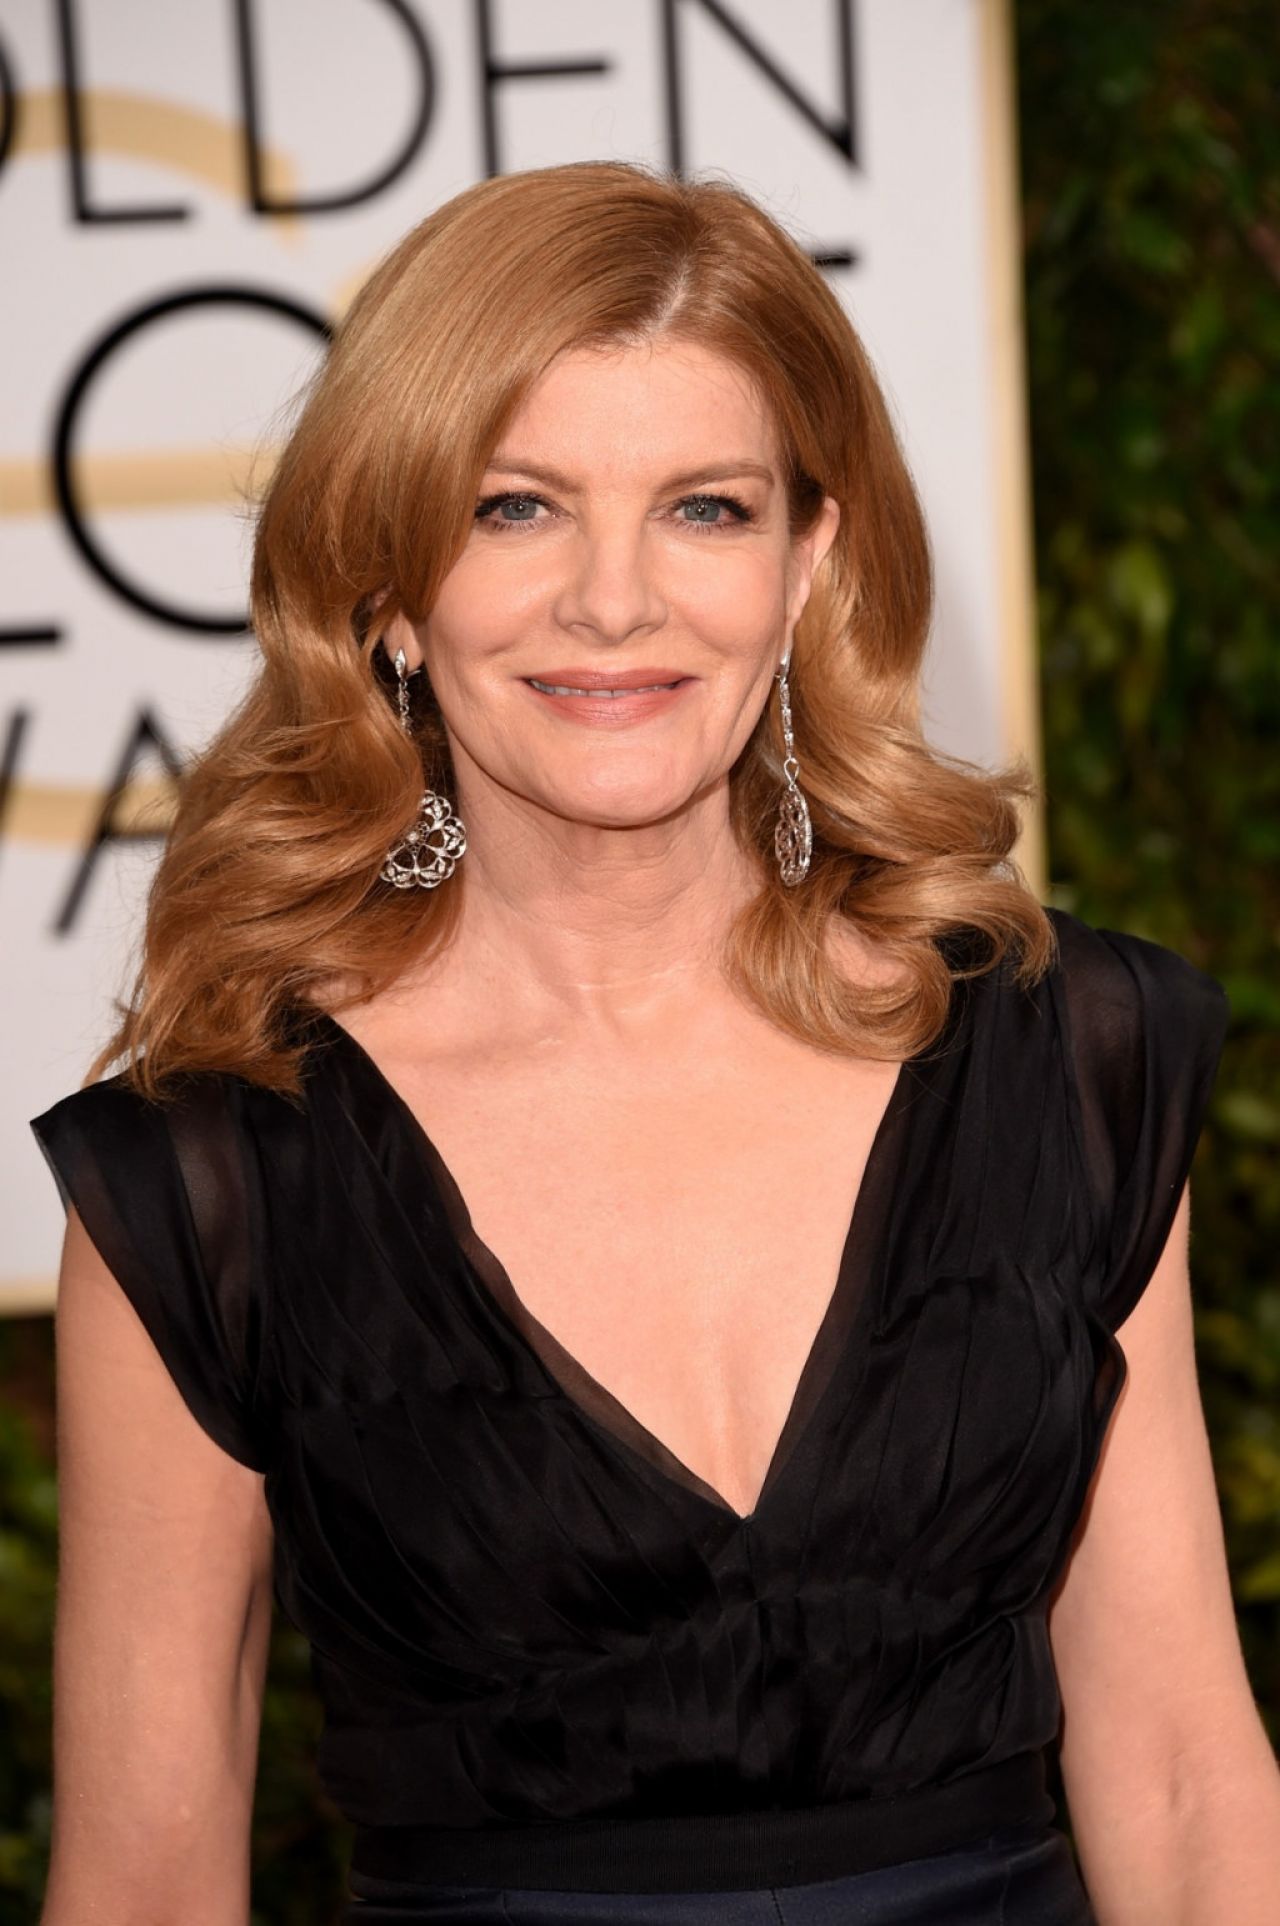 Rene images russo of Rene Russo